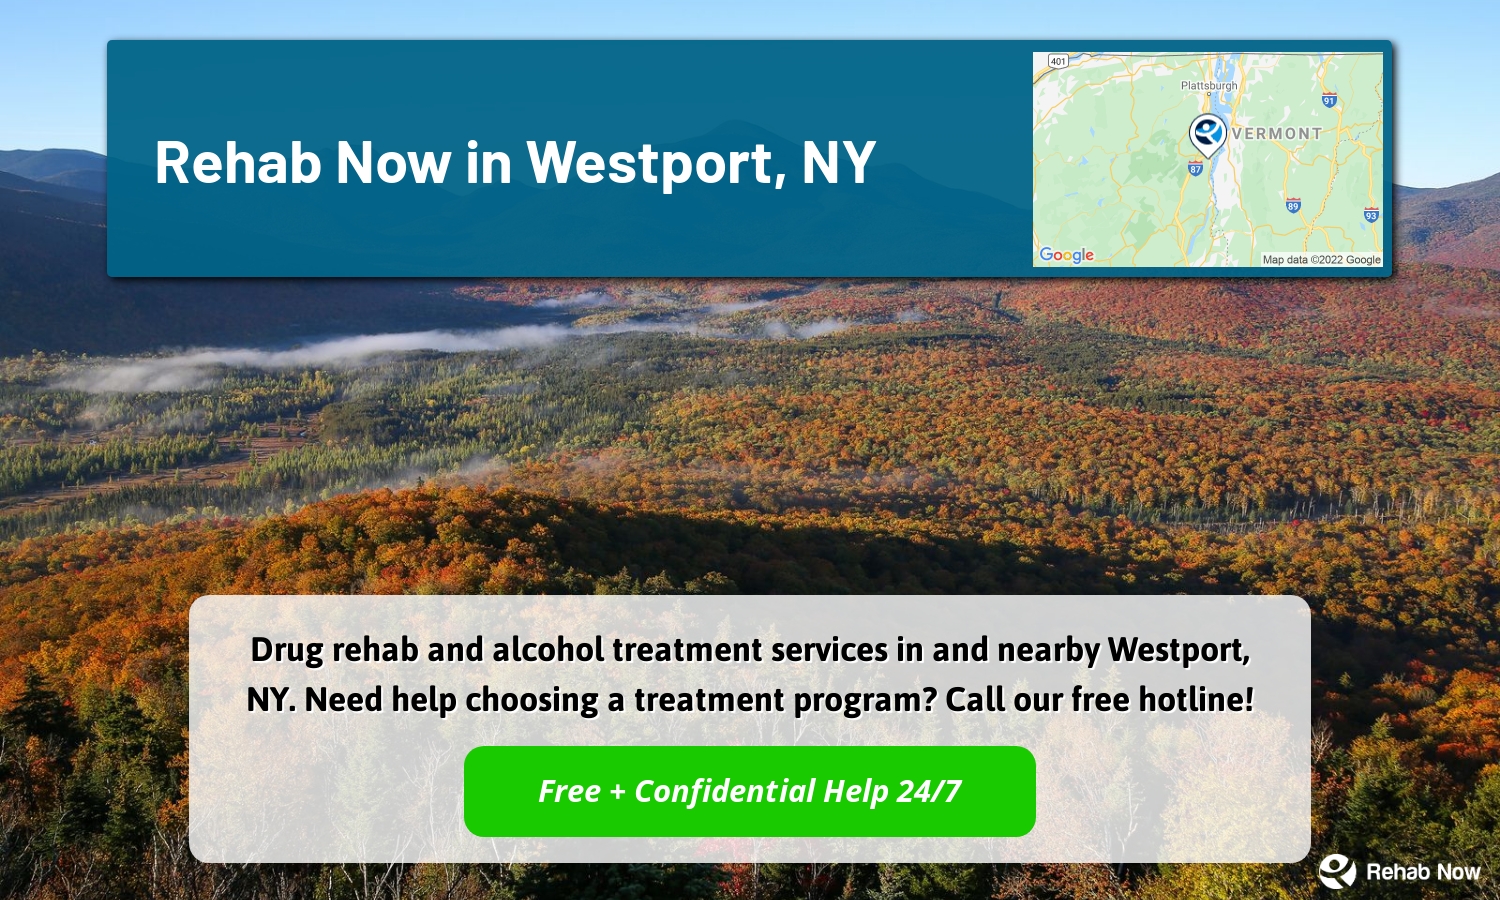 Drug rehab and alcohol treatment services in and nearby Westport, NY. Need help choosing a treatment program? Call our free hotline!